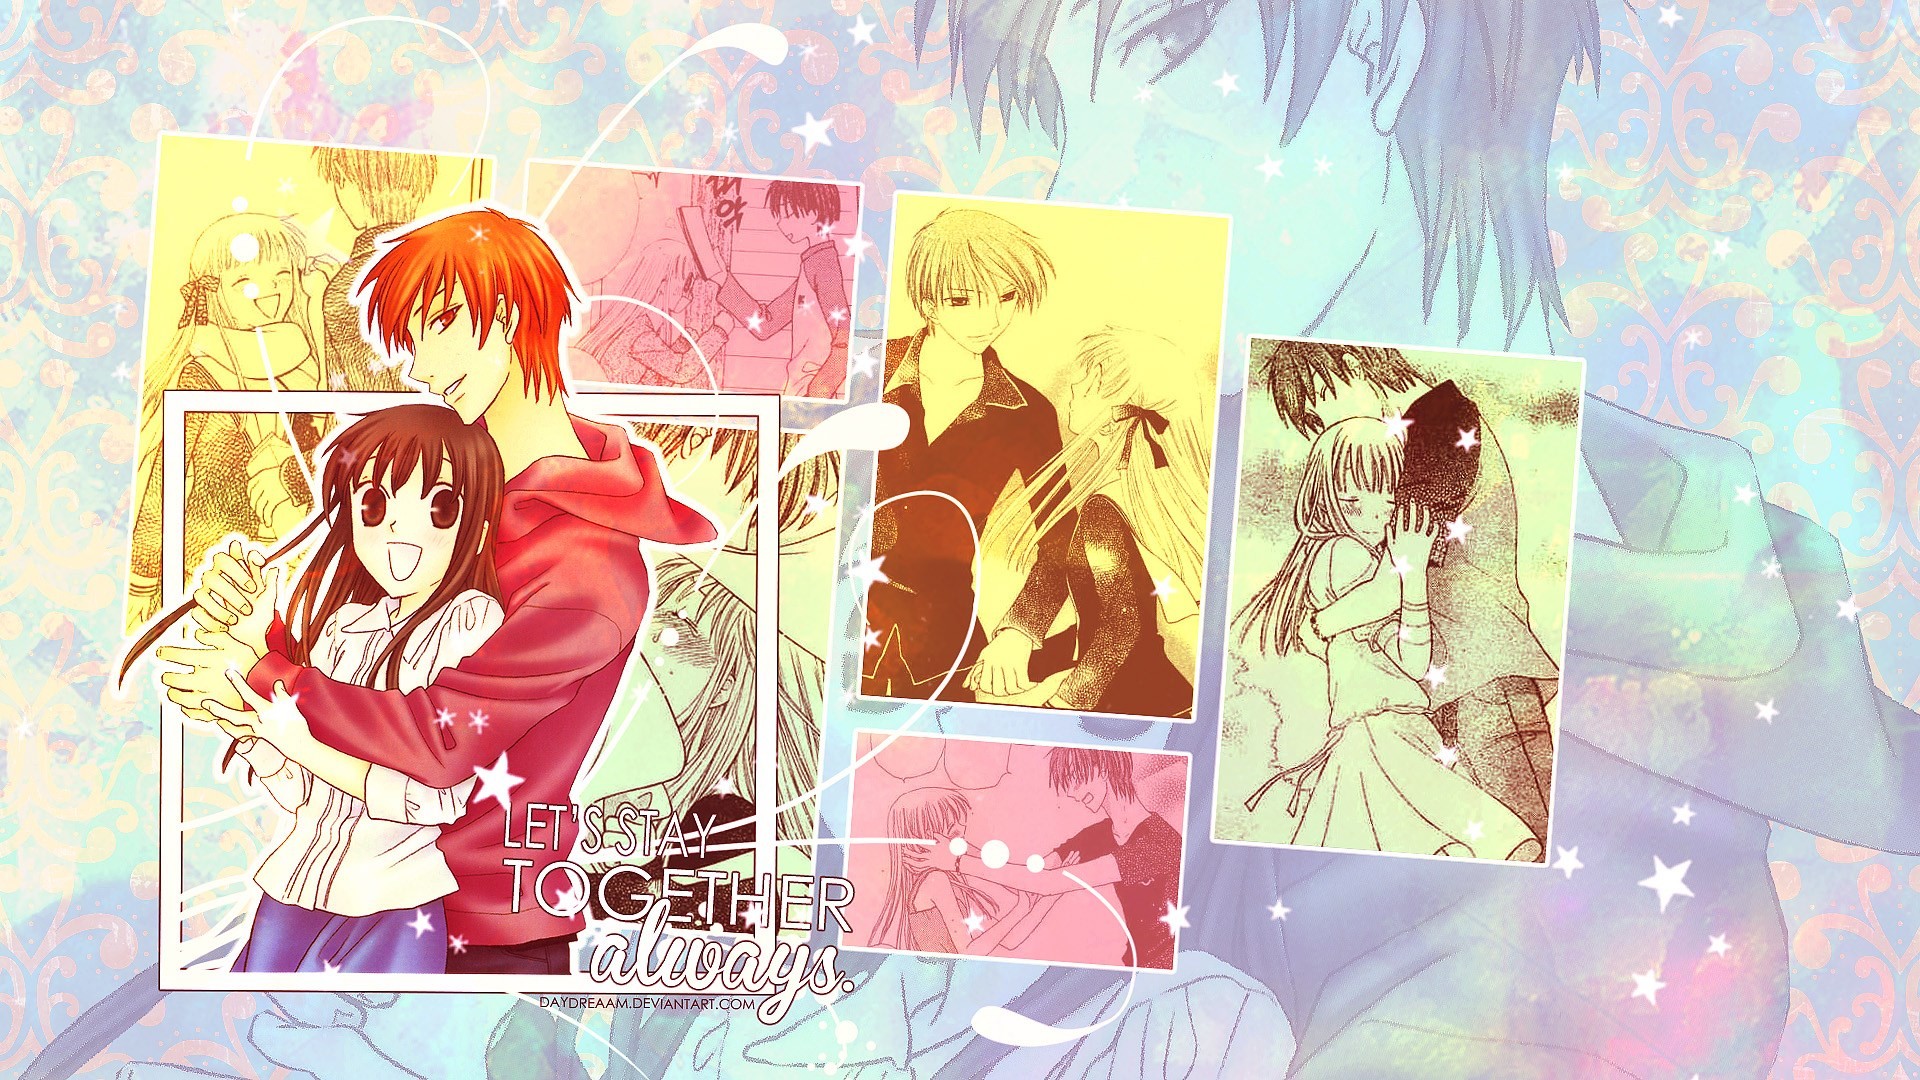 1920x1080 free screensaver wallpapers for fruits basket by Pascoe Walter (2017-03-21)